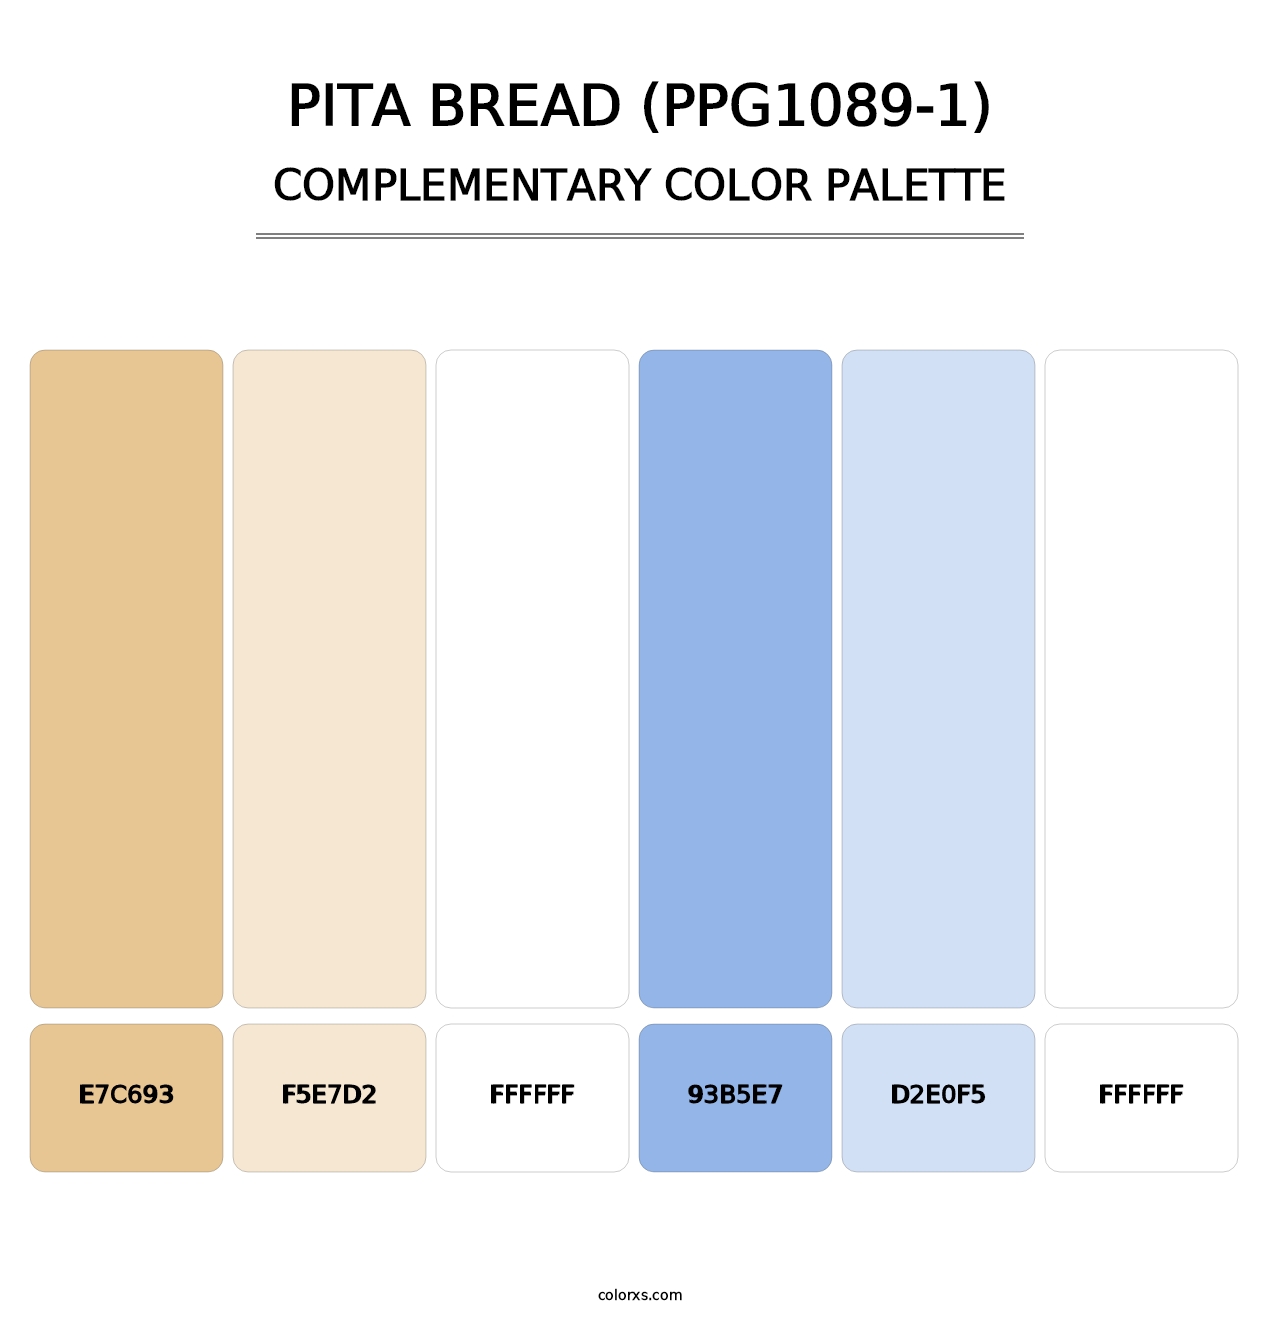 Pita Bread (PPG1089-1) - Complementary Color Palette